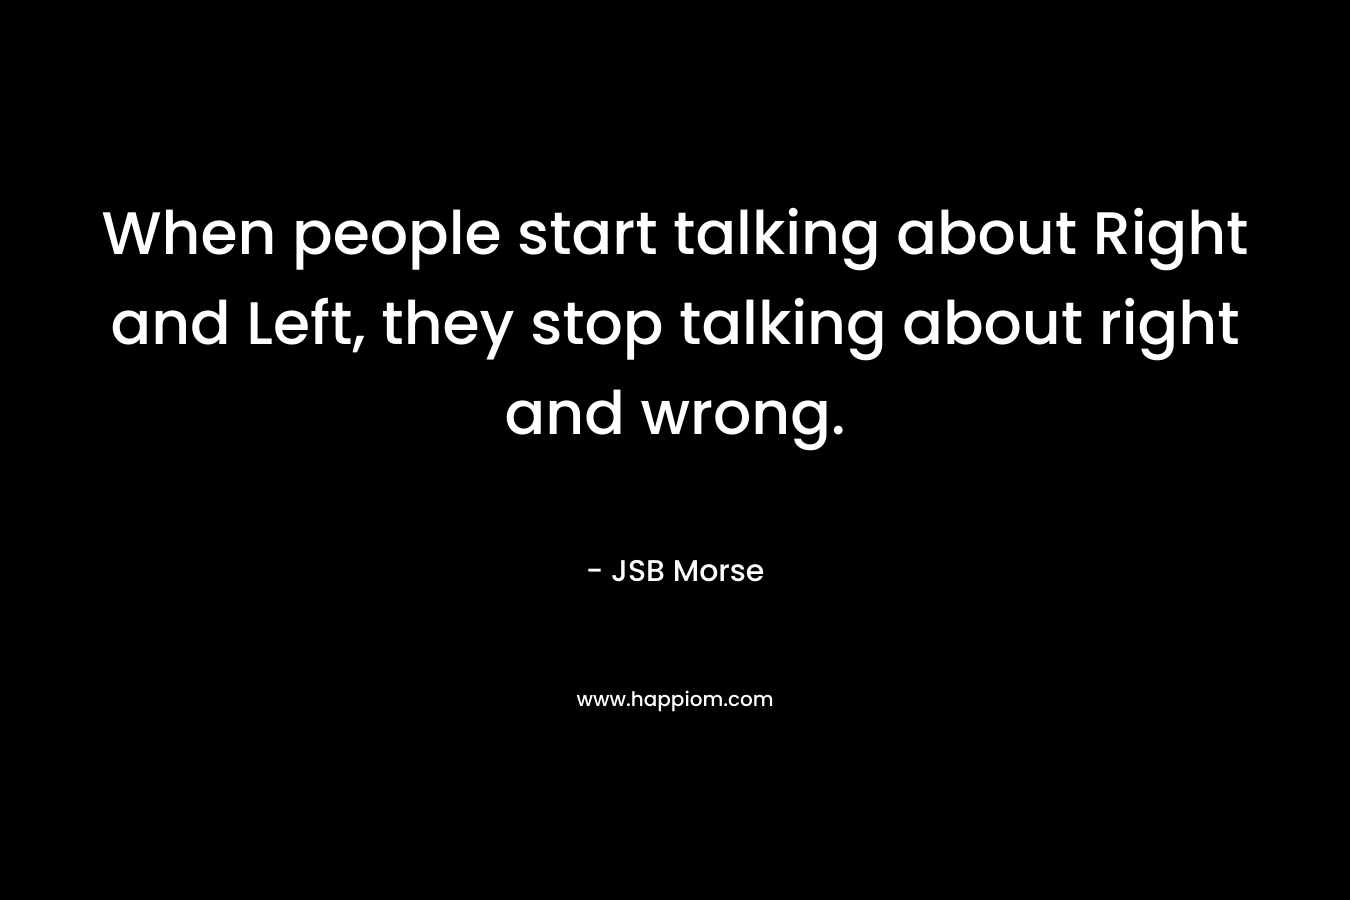 When people start talking about Right and Left, they stop talking about right and wrong.